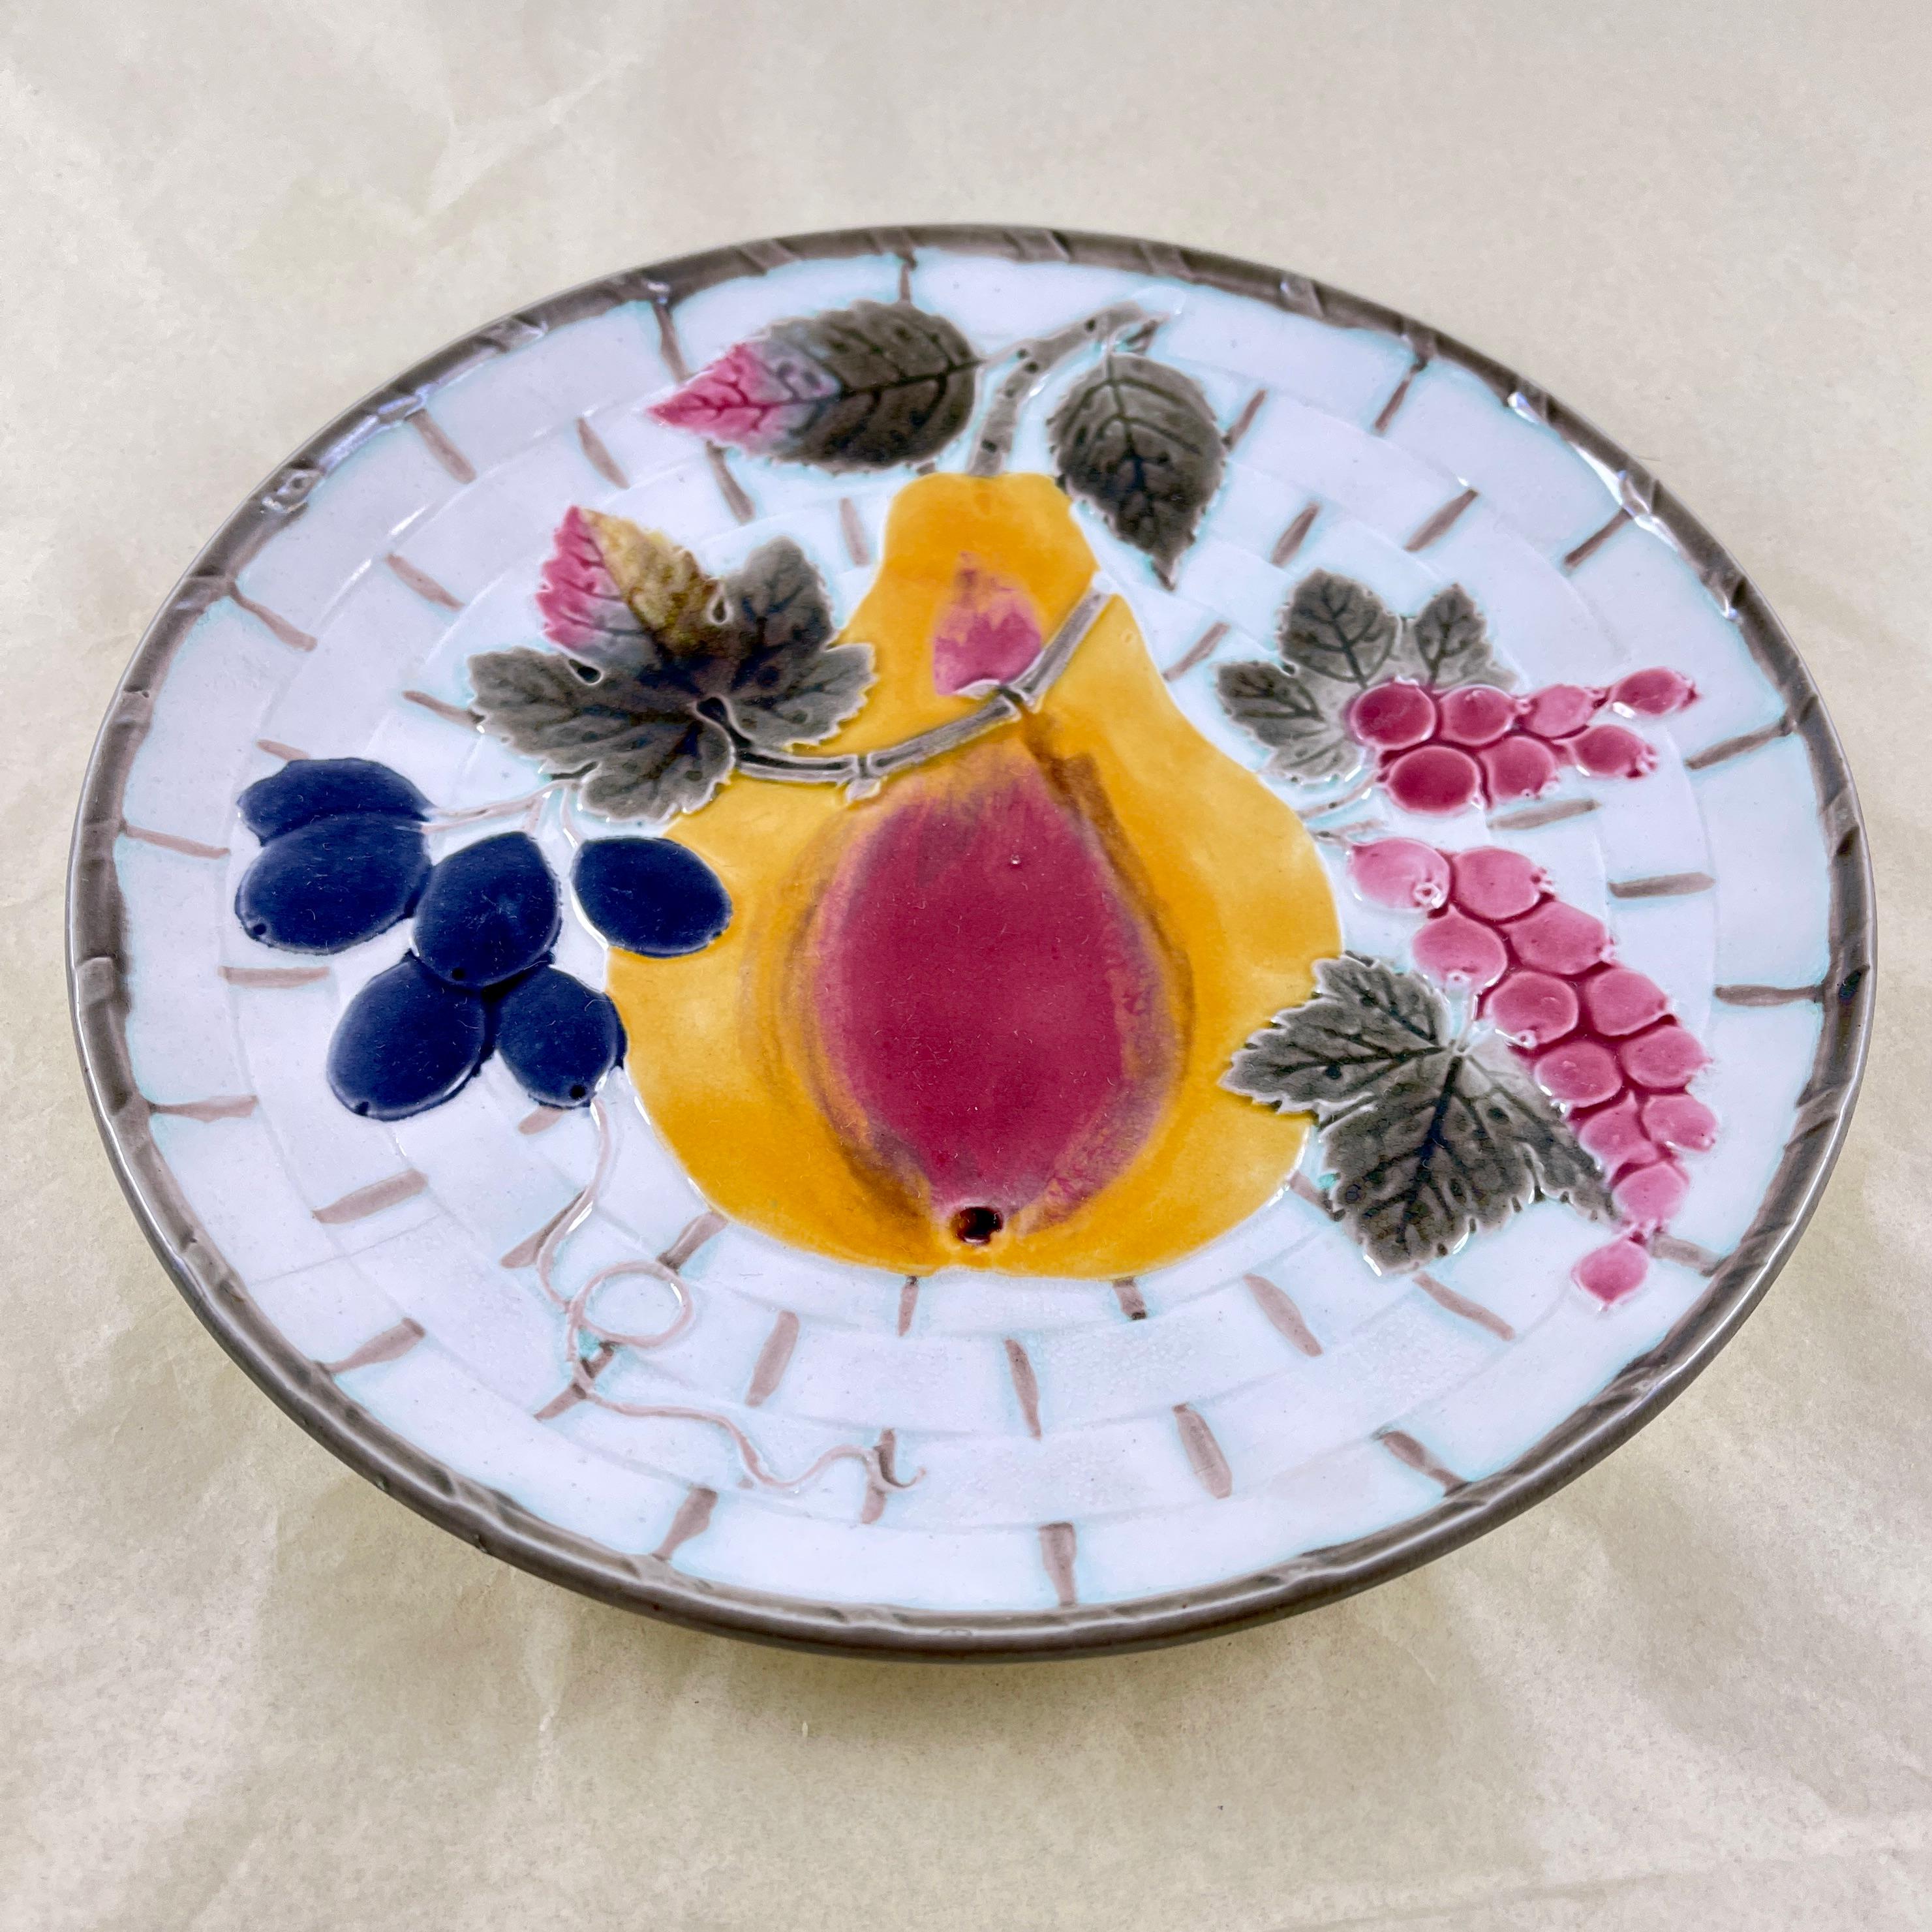 English Wedgwood Argenta Majolica Pear Fruit Plate For Sale